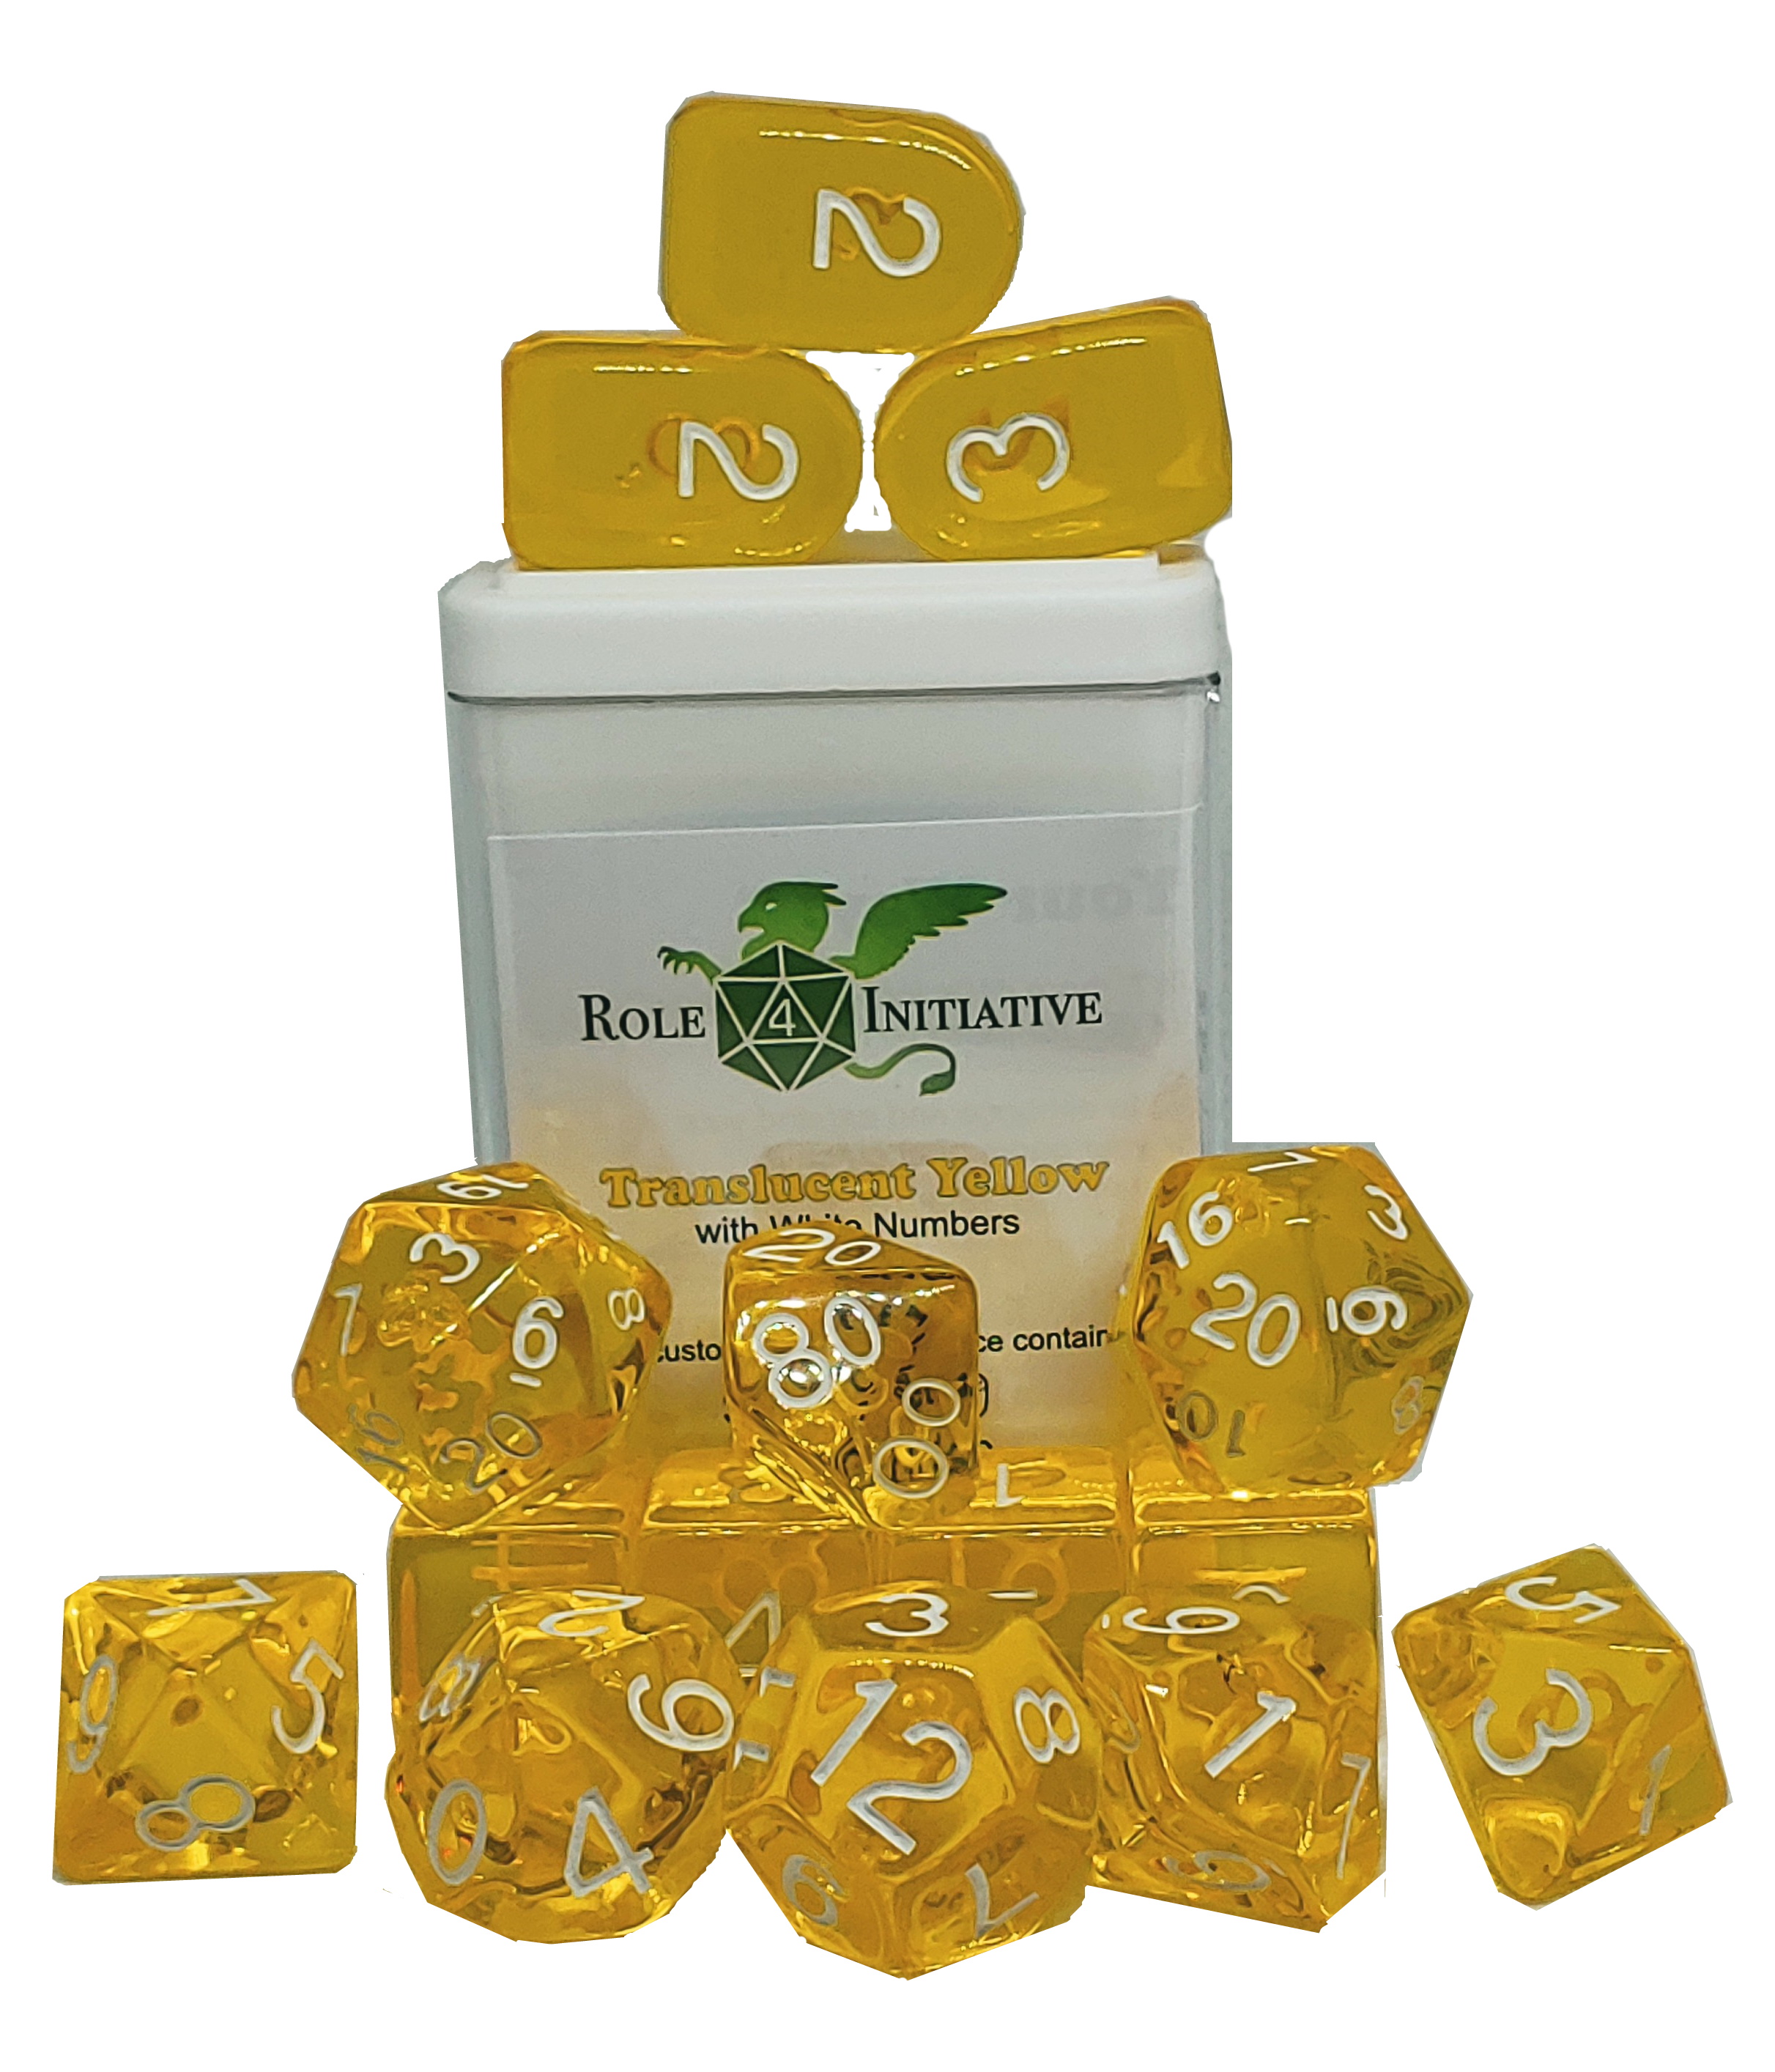 Role 4 Initiative: Polyhedral 15 Dice Set: Translucent Yellow And White Arch D4  